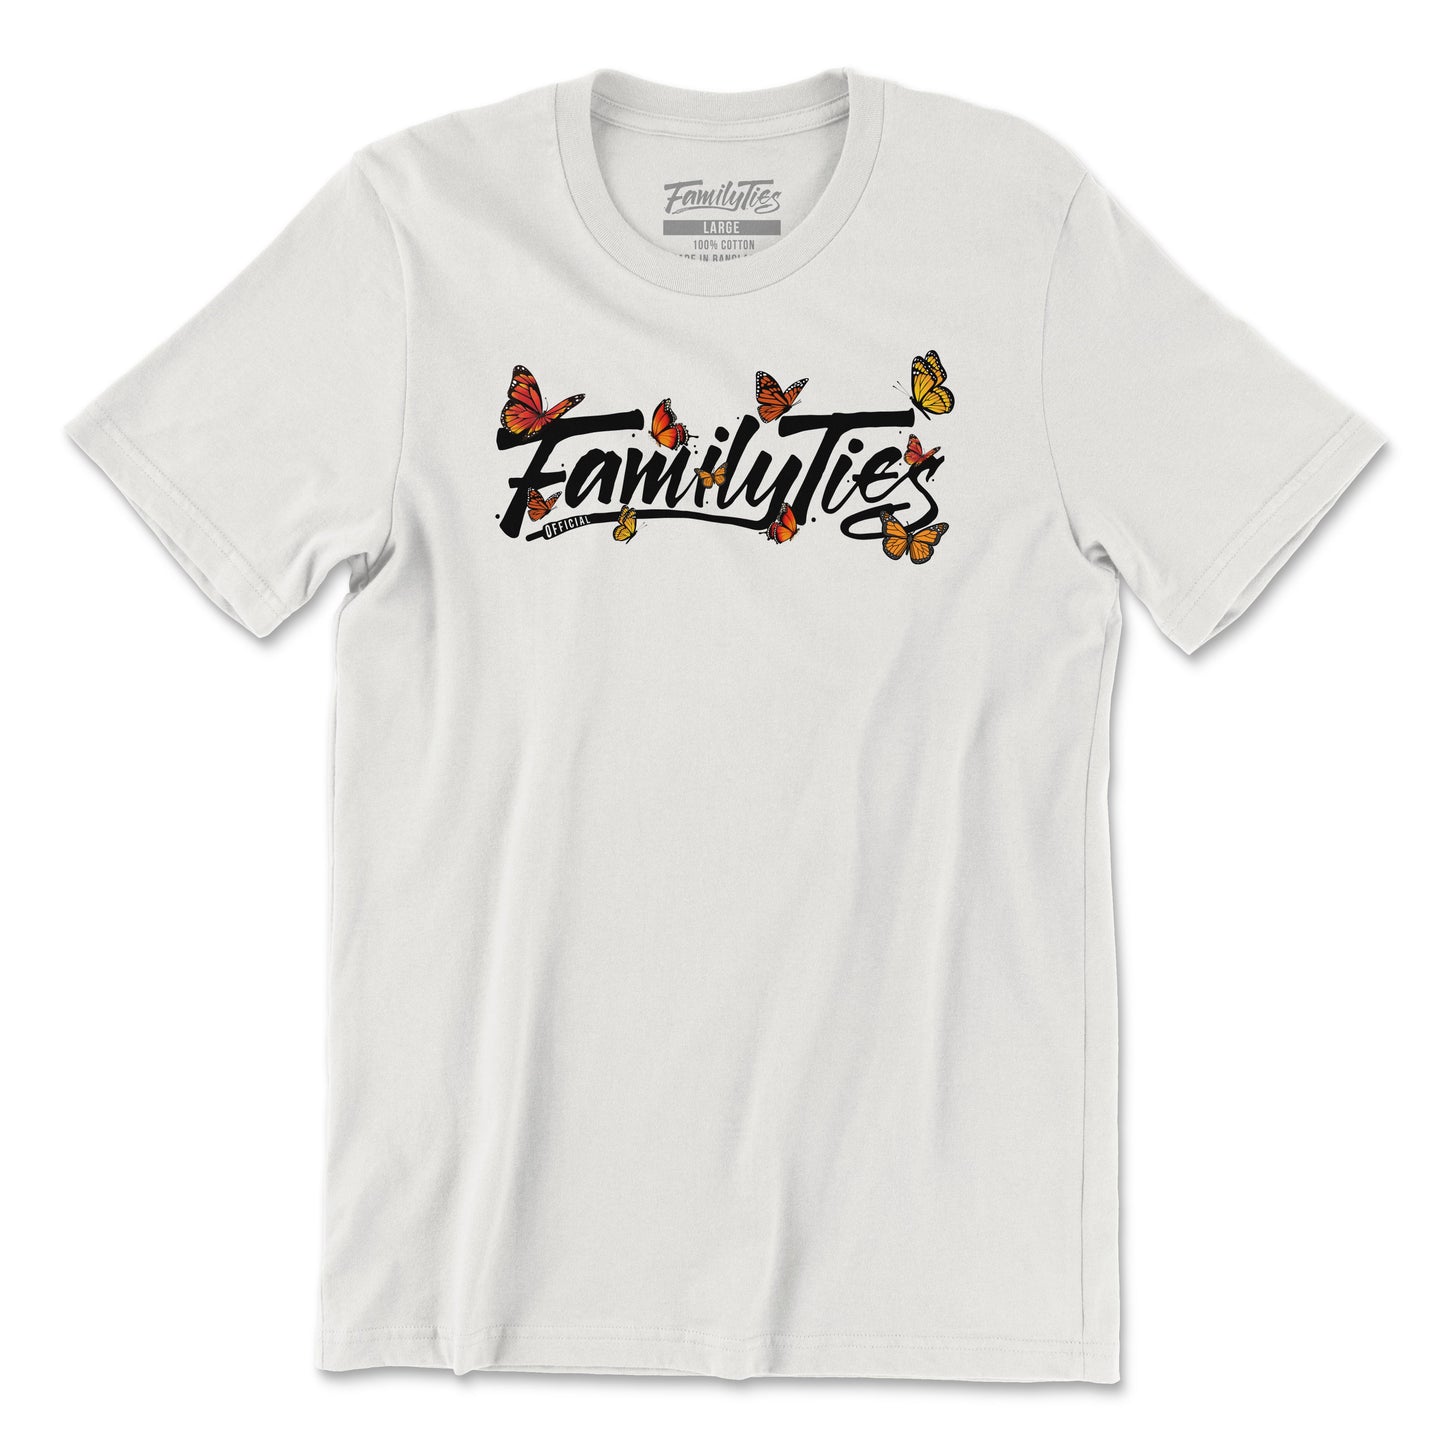 Family Ties Official "Beautiful Family" White Tee